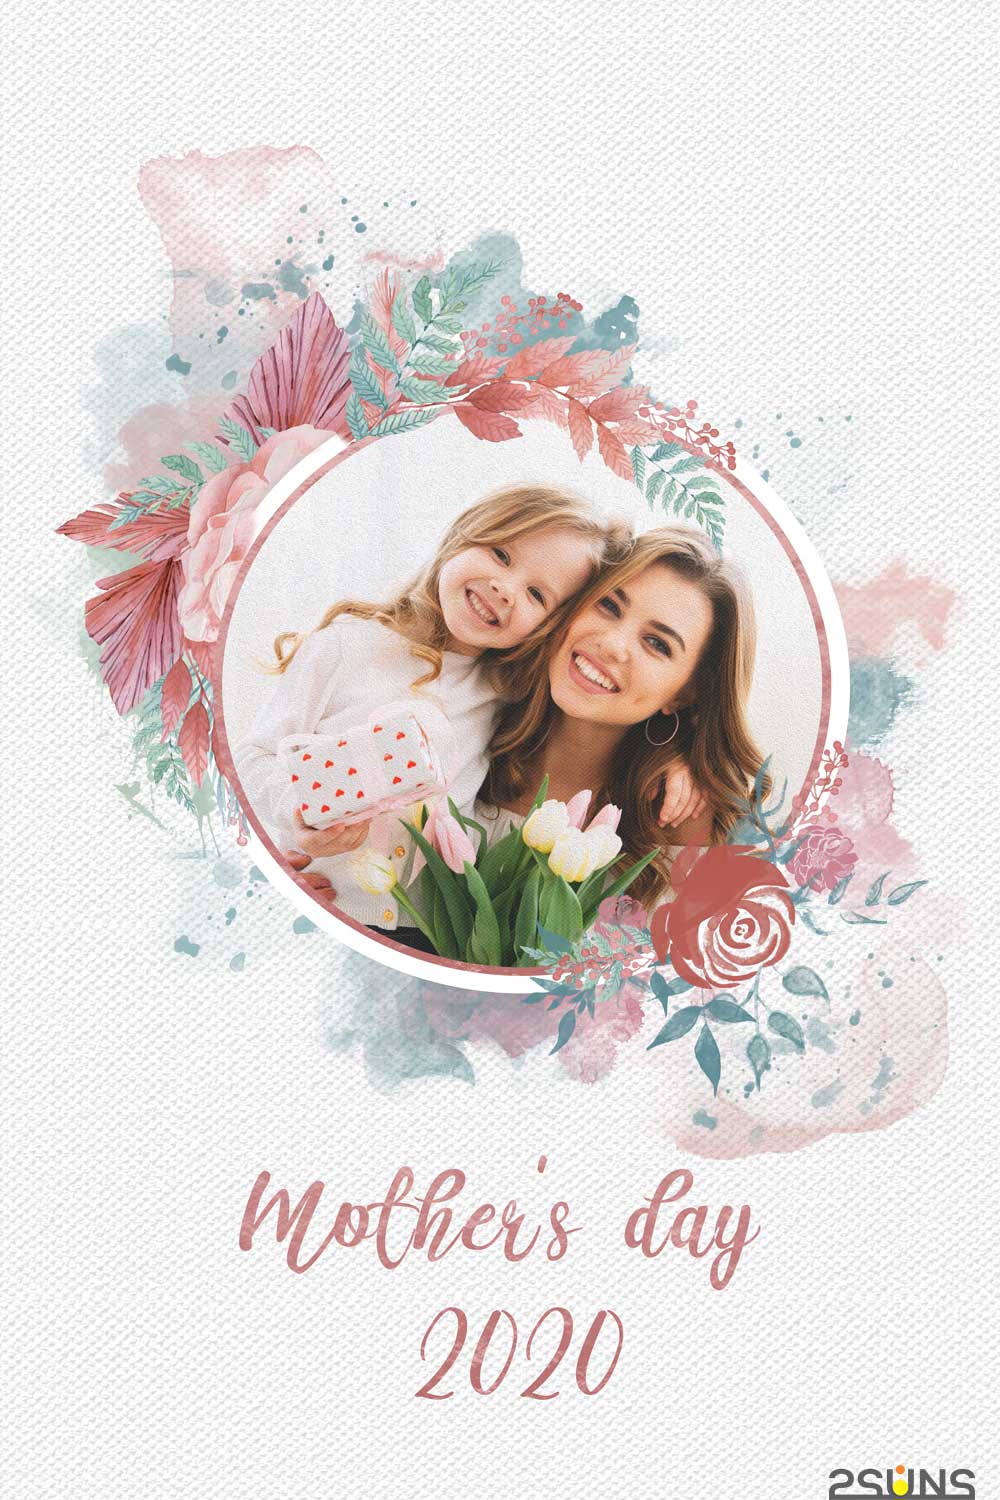 Mothers Day Watercolor Flowers Overlay Template Pinterest Image.